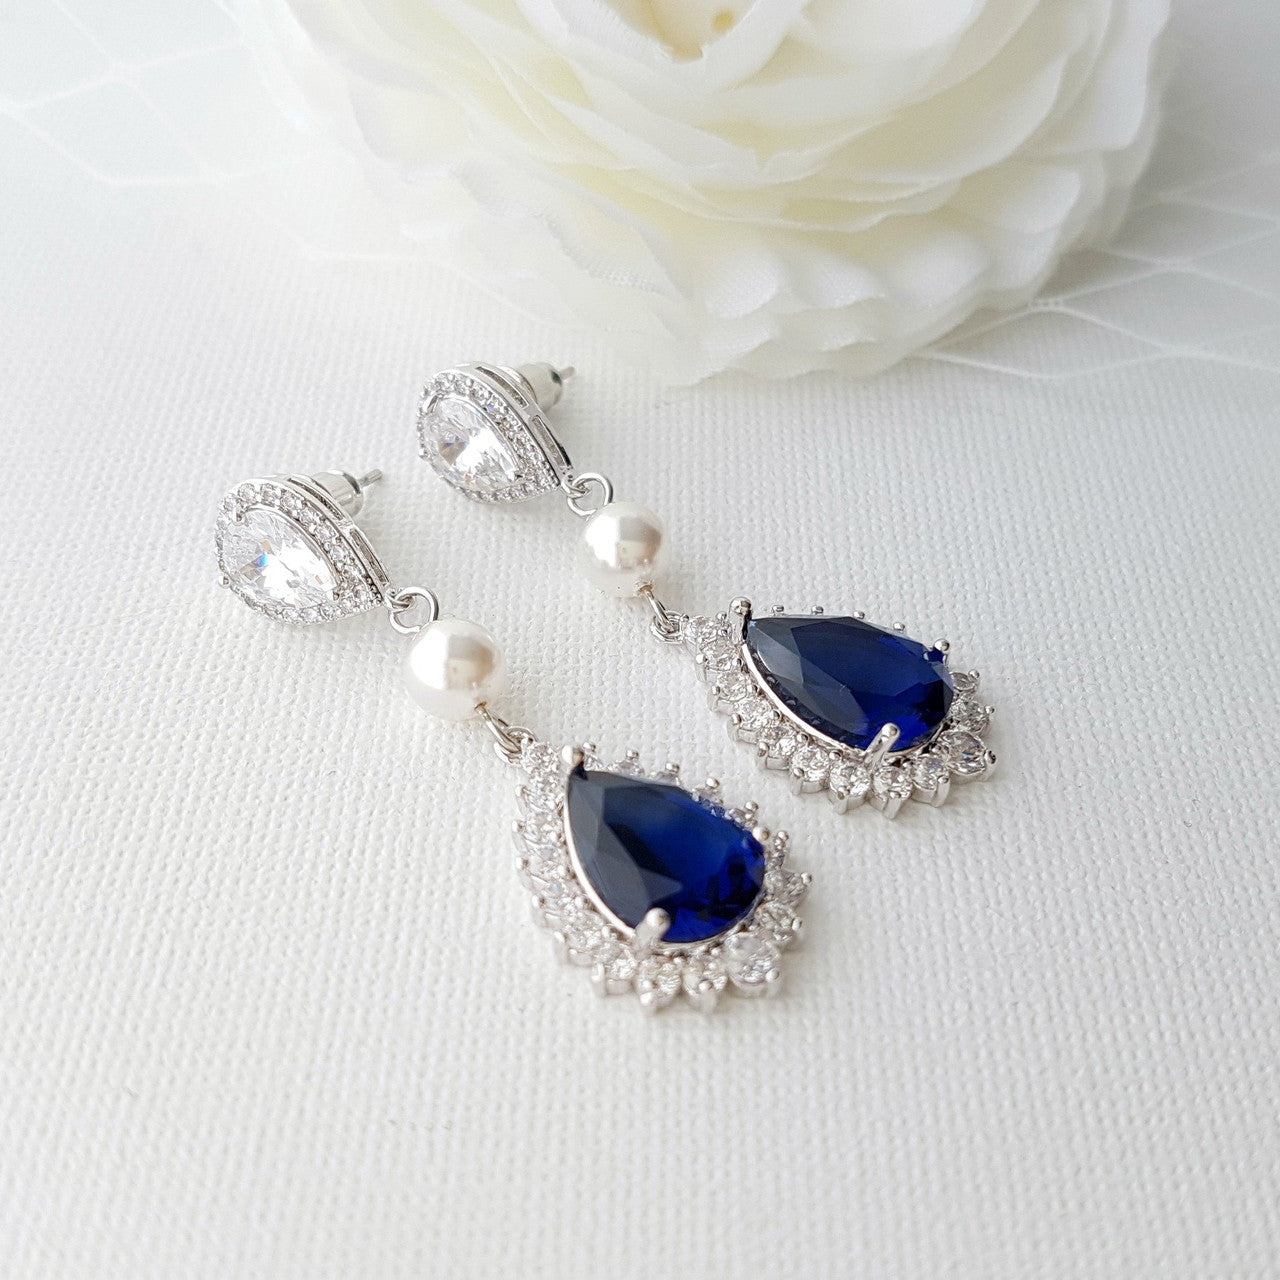 Blue and Silver Crystal Earrings with Pearls For Brides, Weddings, Events- Poetry Designs